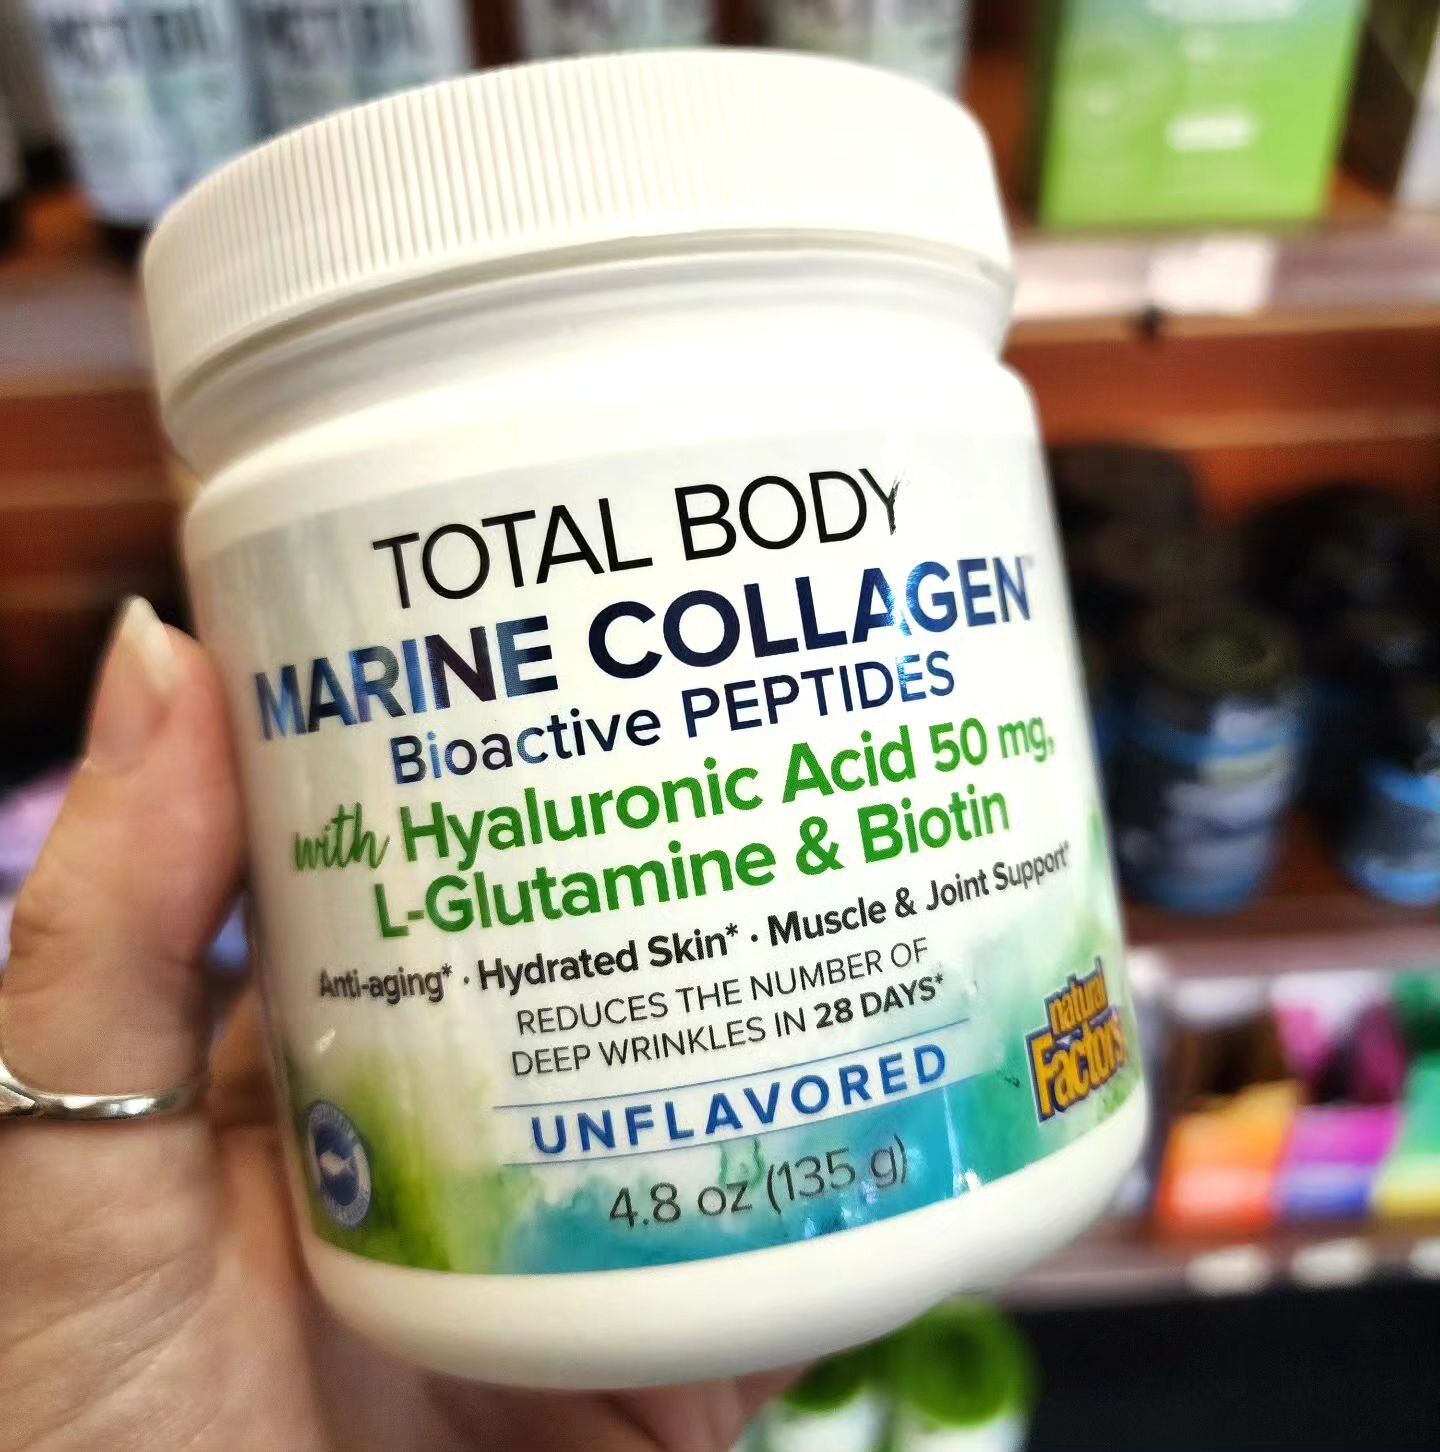 Are you looking for an alternative to bovine collagen? Now introducing Total Body Marine Collagen sourced from sustainably sourced wild-caught North Atlantic whitefish. Neutral flavor and odour-free!  #TotalBodyCollagen #CleanCollagen #HydrolyzedColl